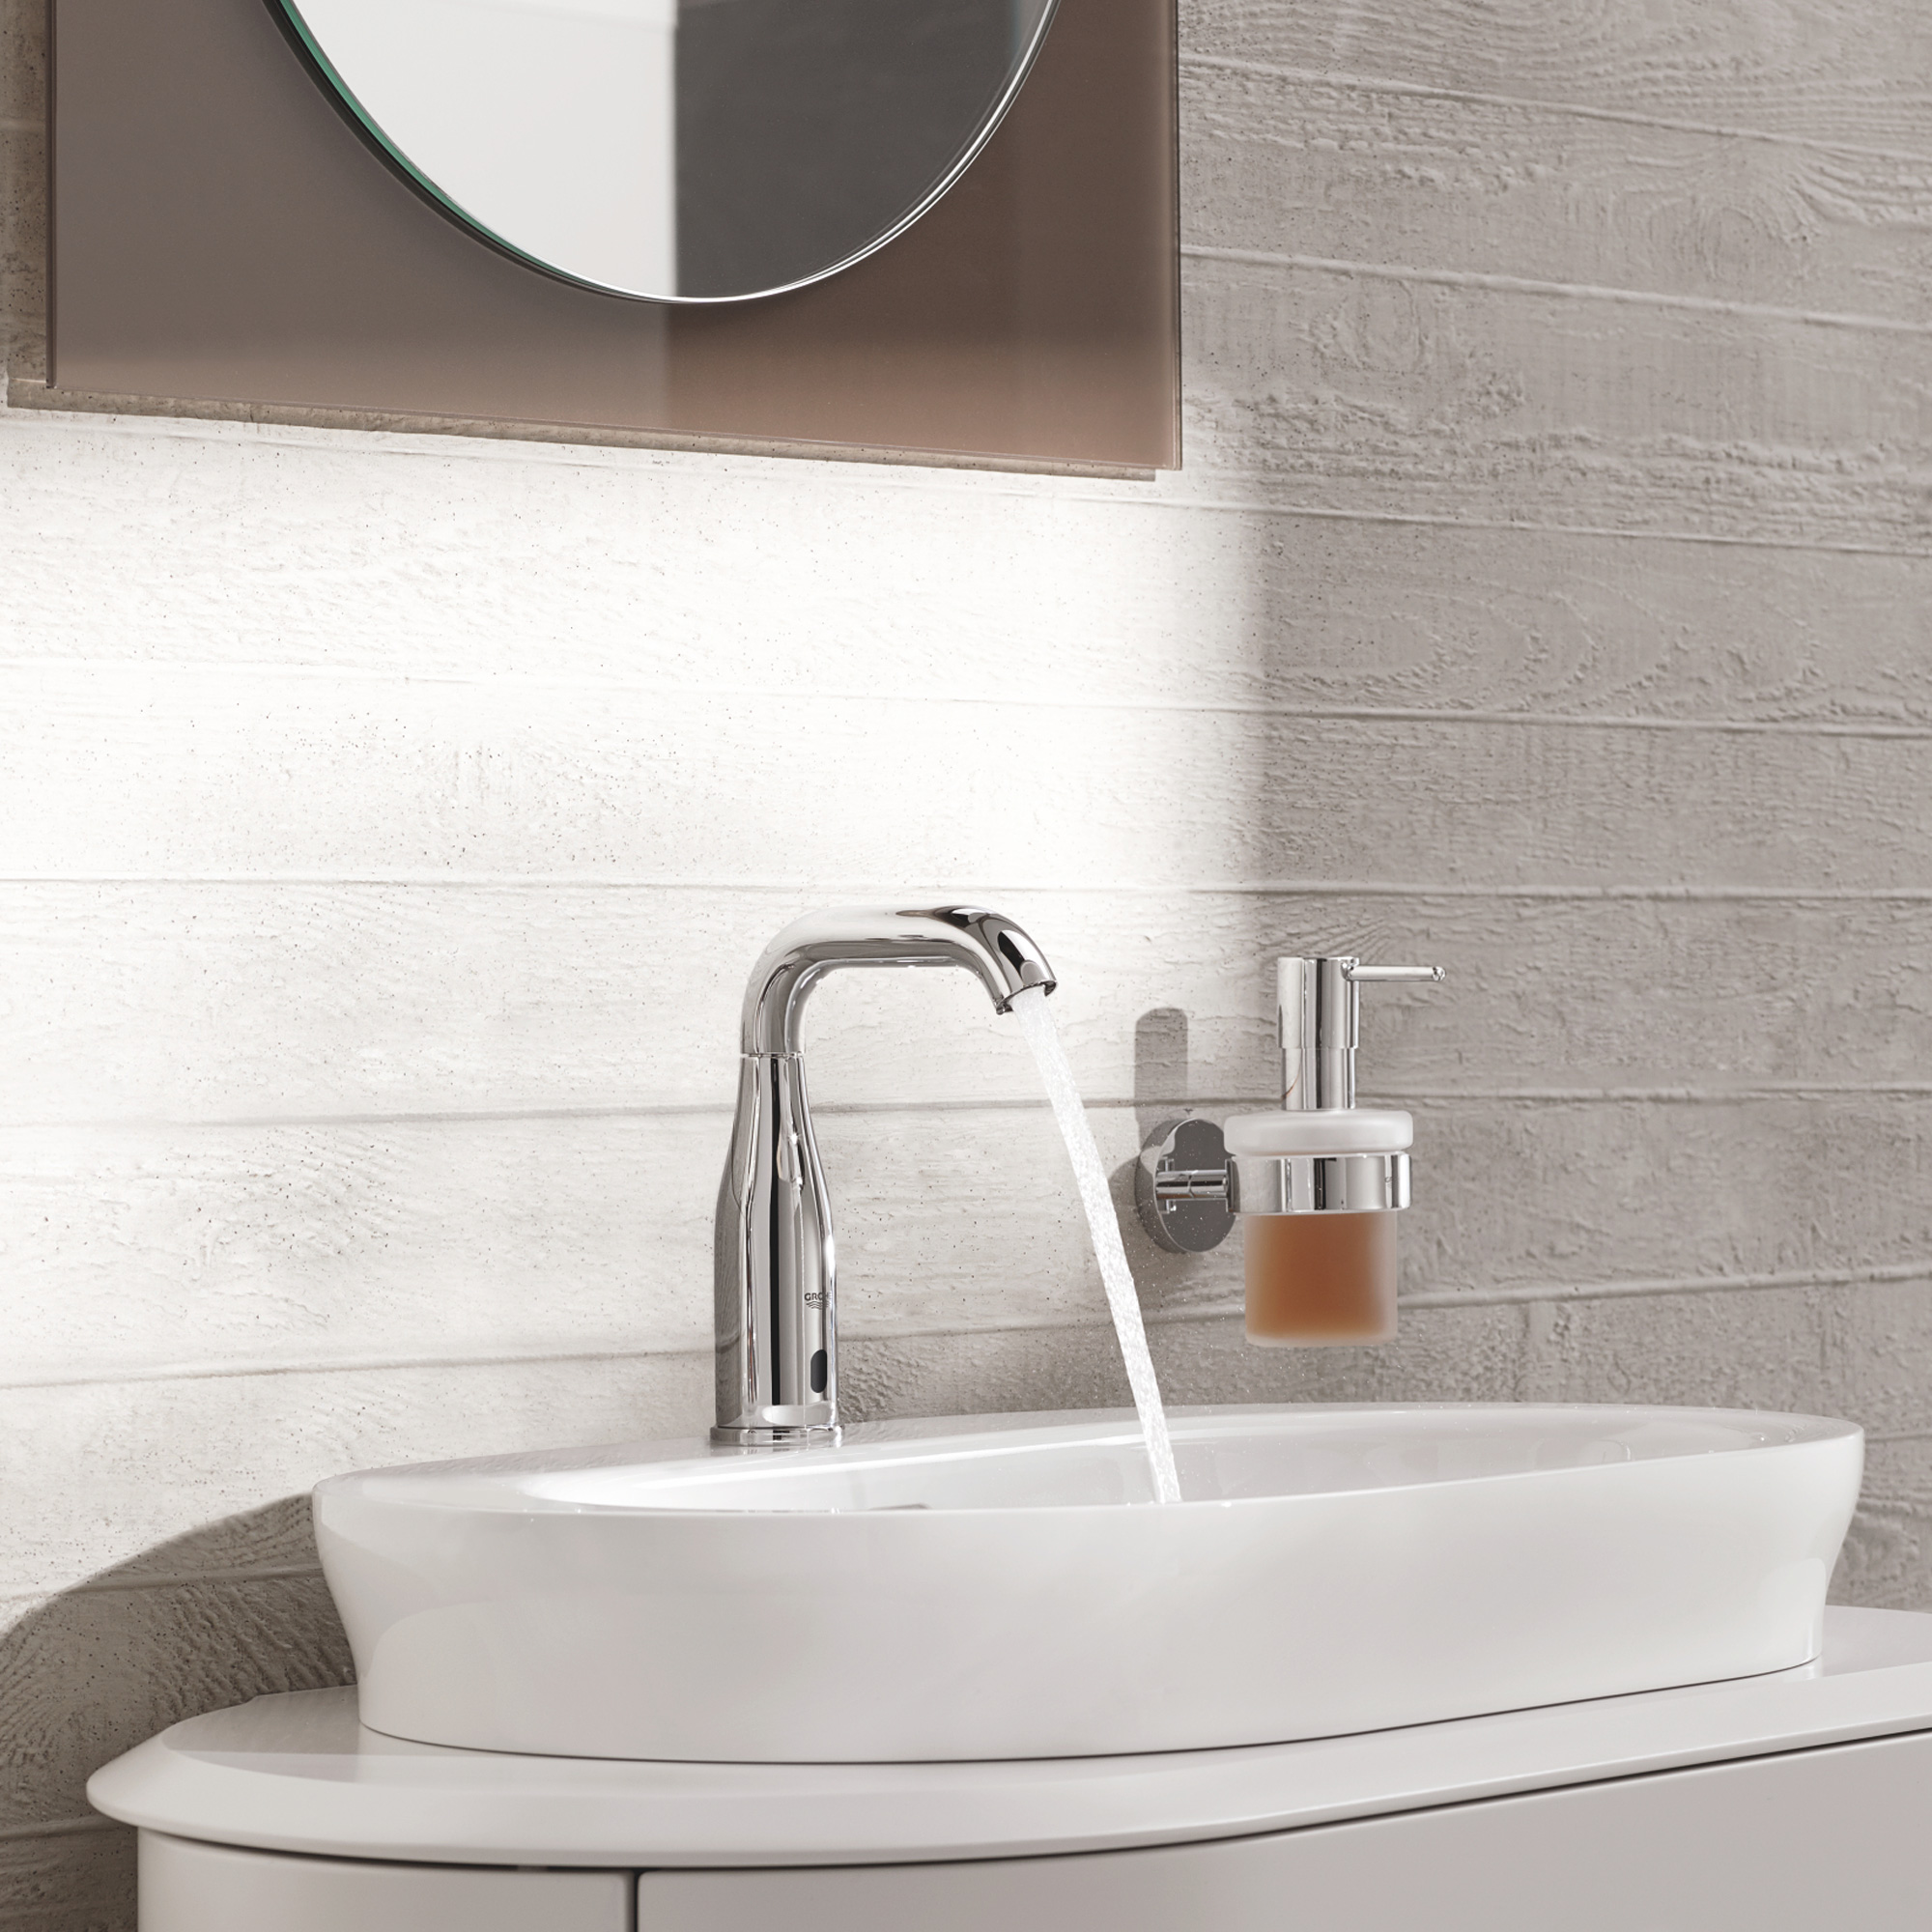 Grohe Essence infrared basin without temperature control - 36446000 | REUTER